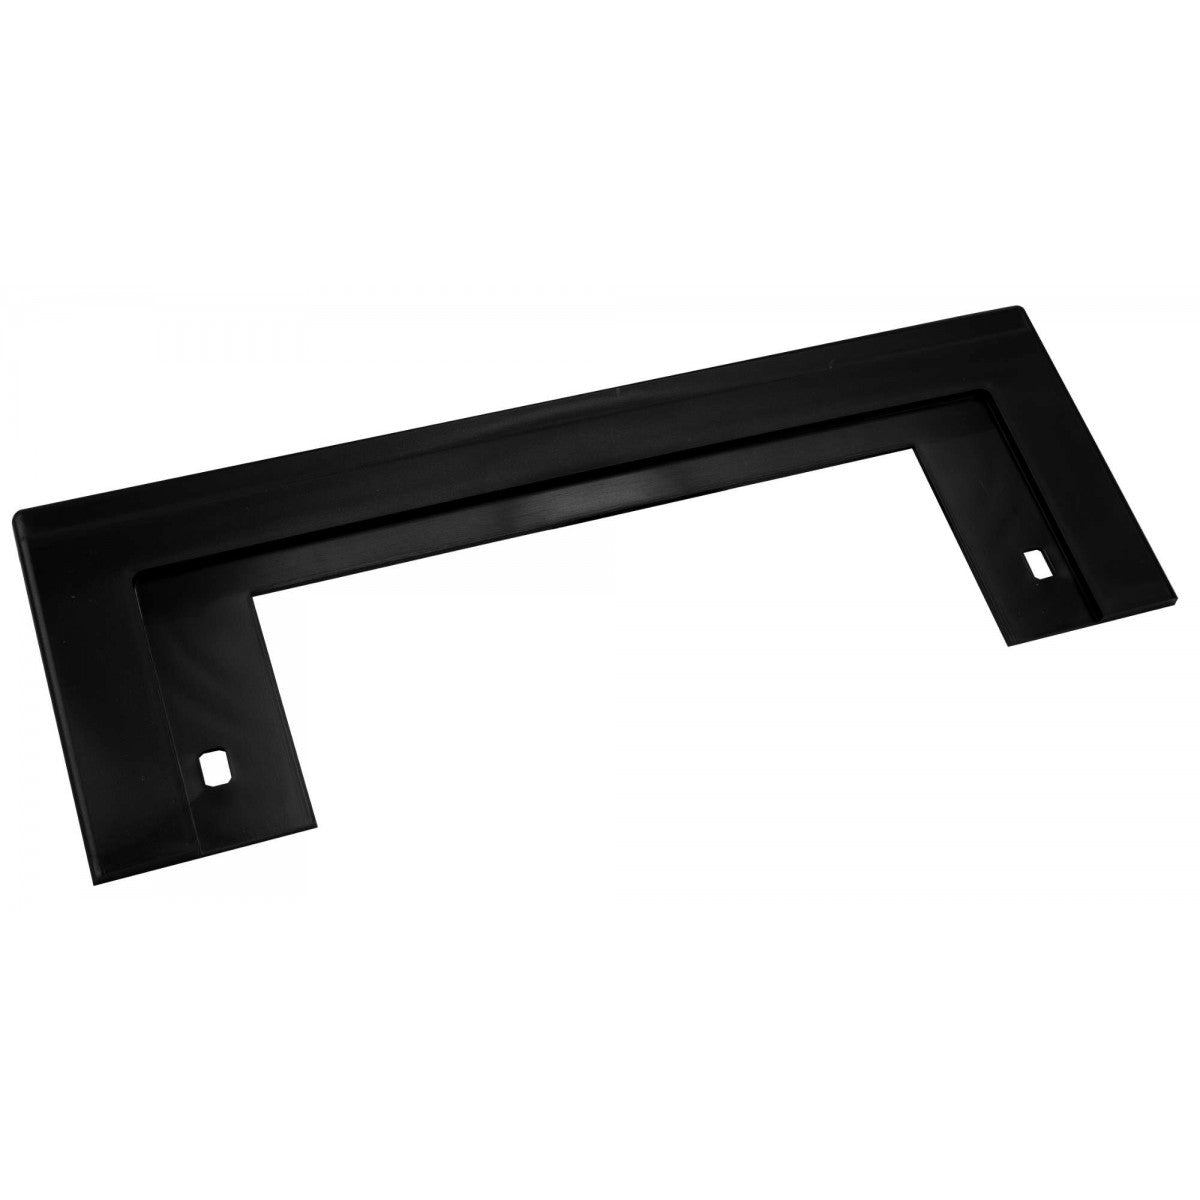 CanSweep trim plate